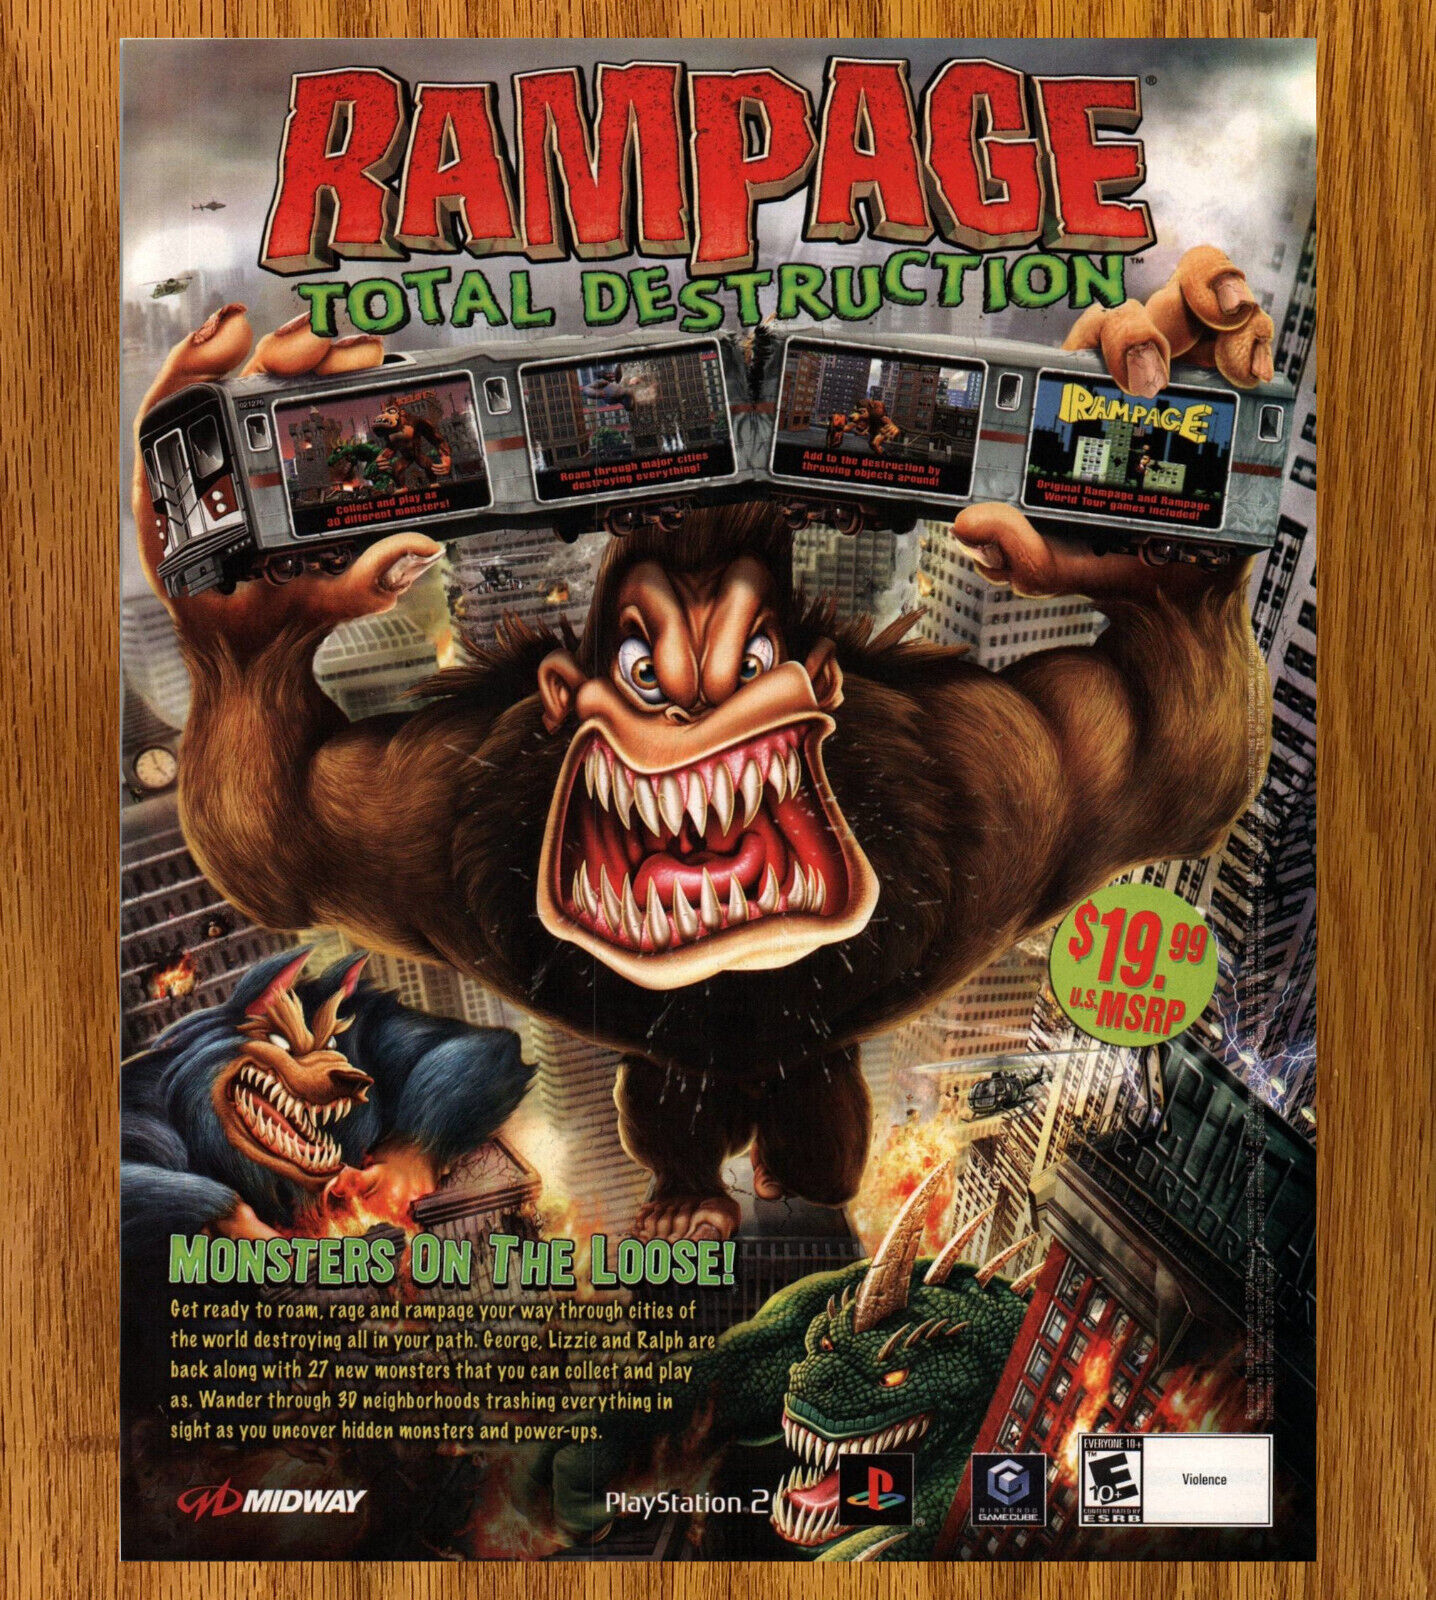 Rampage Total Destruction Monsters - Video Game Print Ad / Poster Promo Art 2006